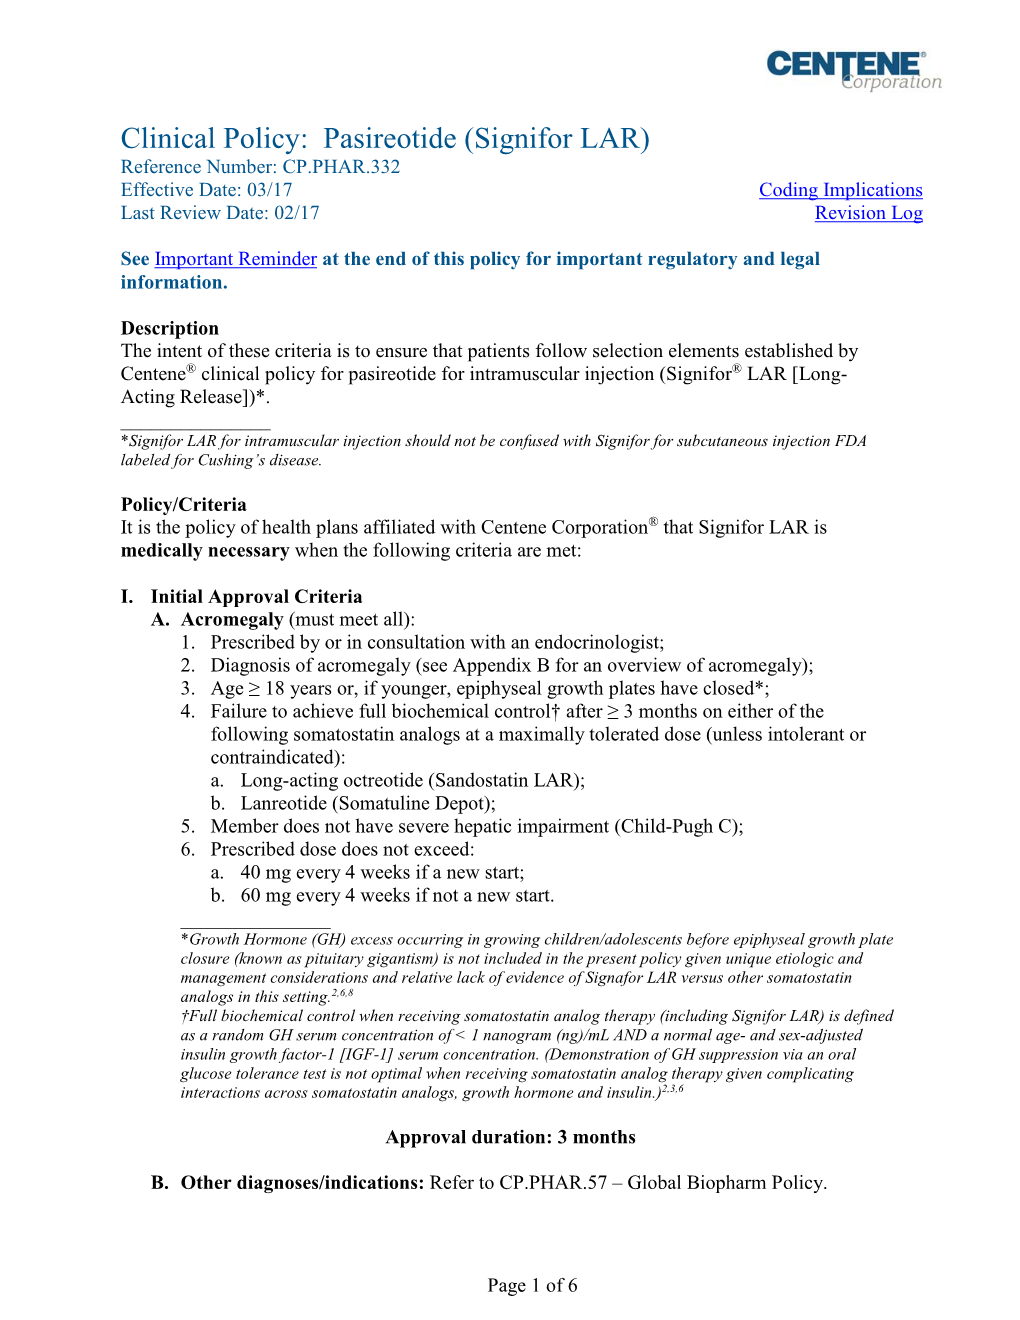 Clinical Policy: Pasireotide (Signifor LAR) Reference Number: CP.PHAR.332 Effective Date: 03/17 Coding Implications Last Review Date: 02/17 Revision Log